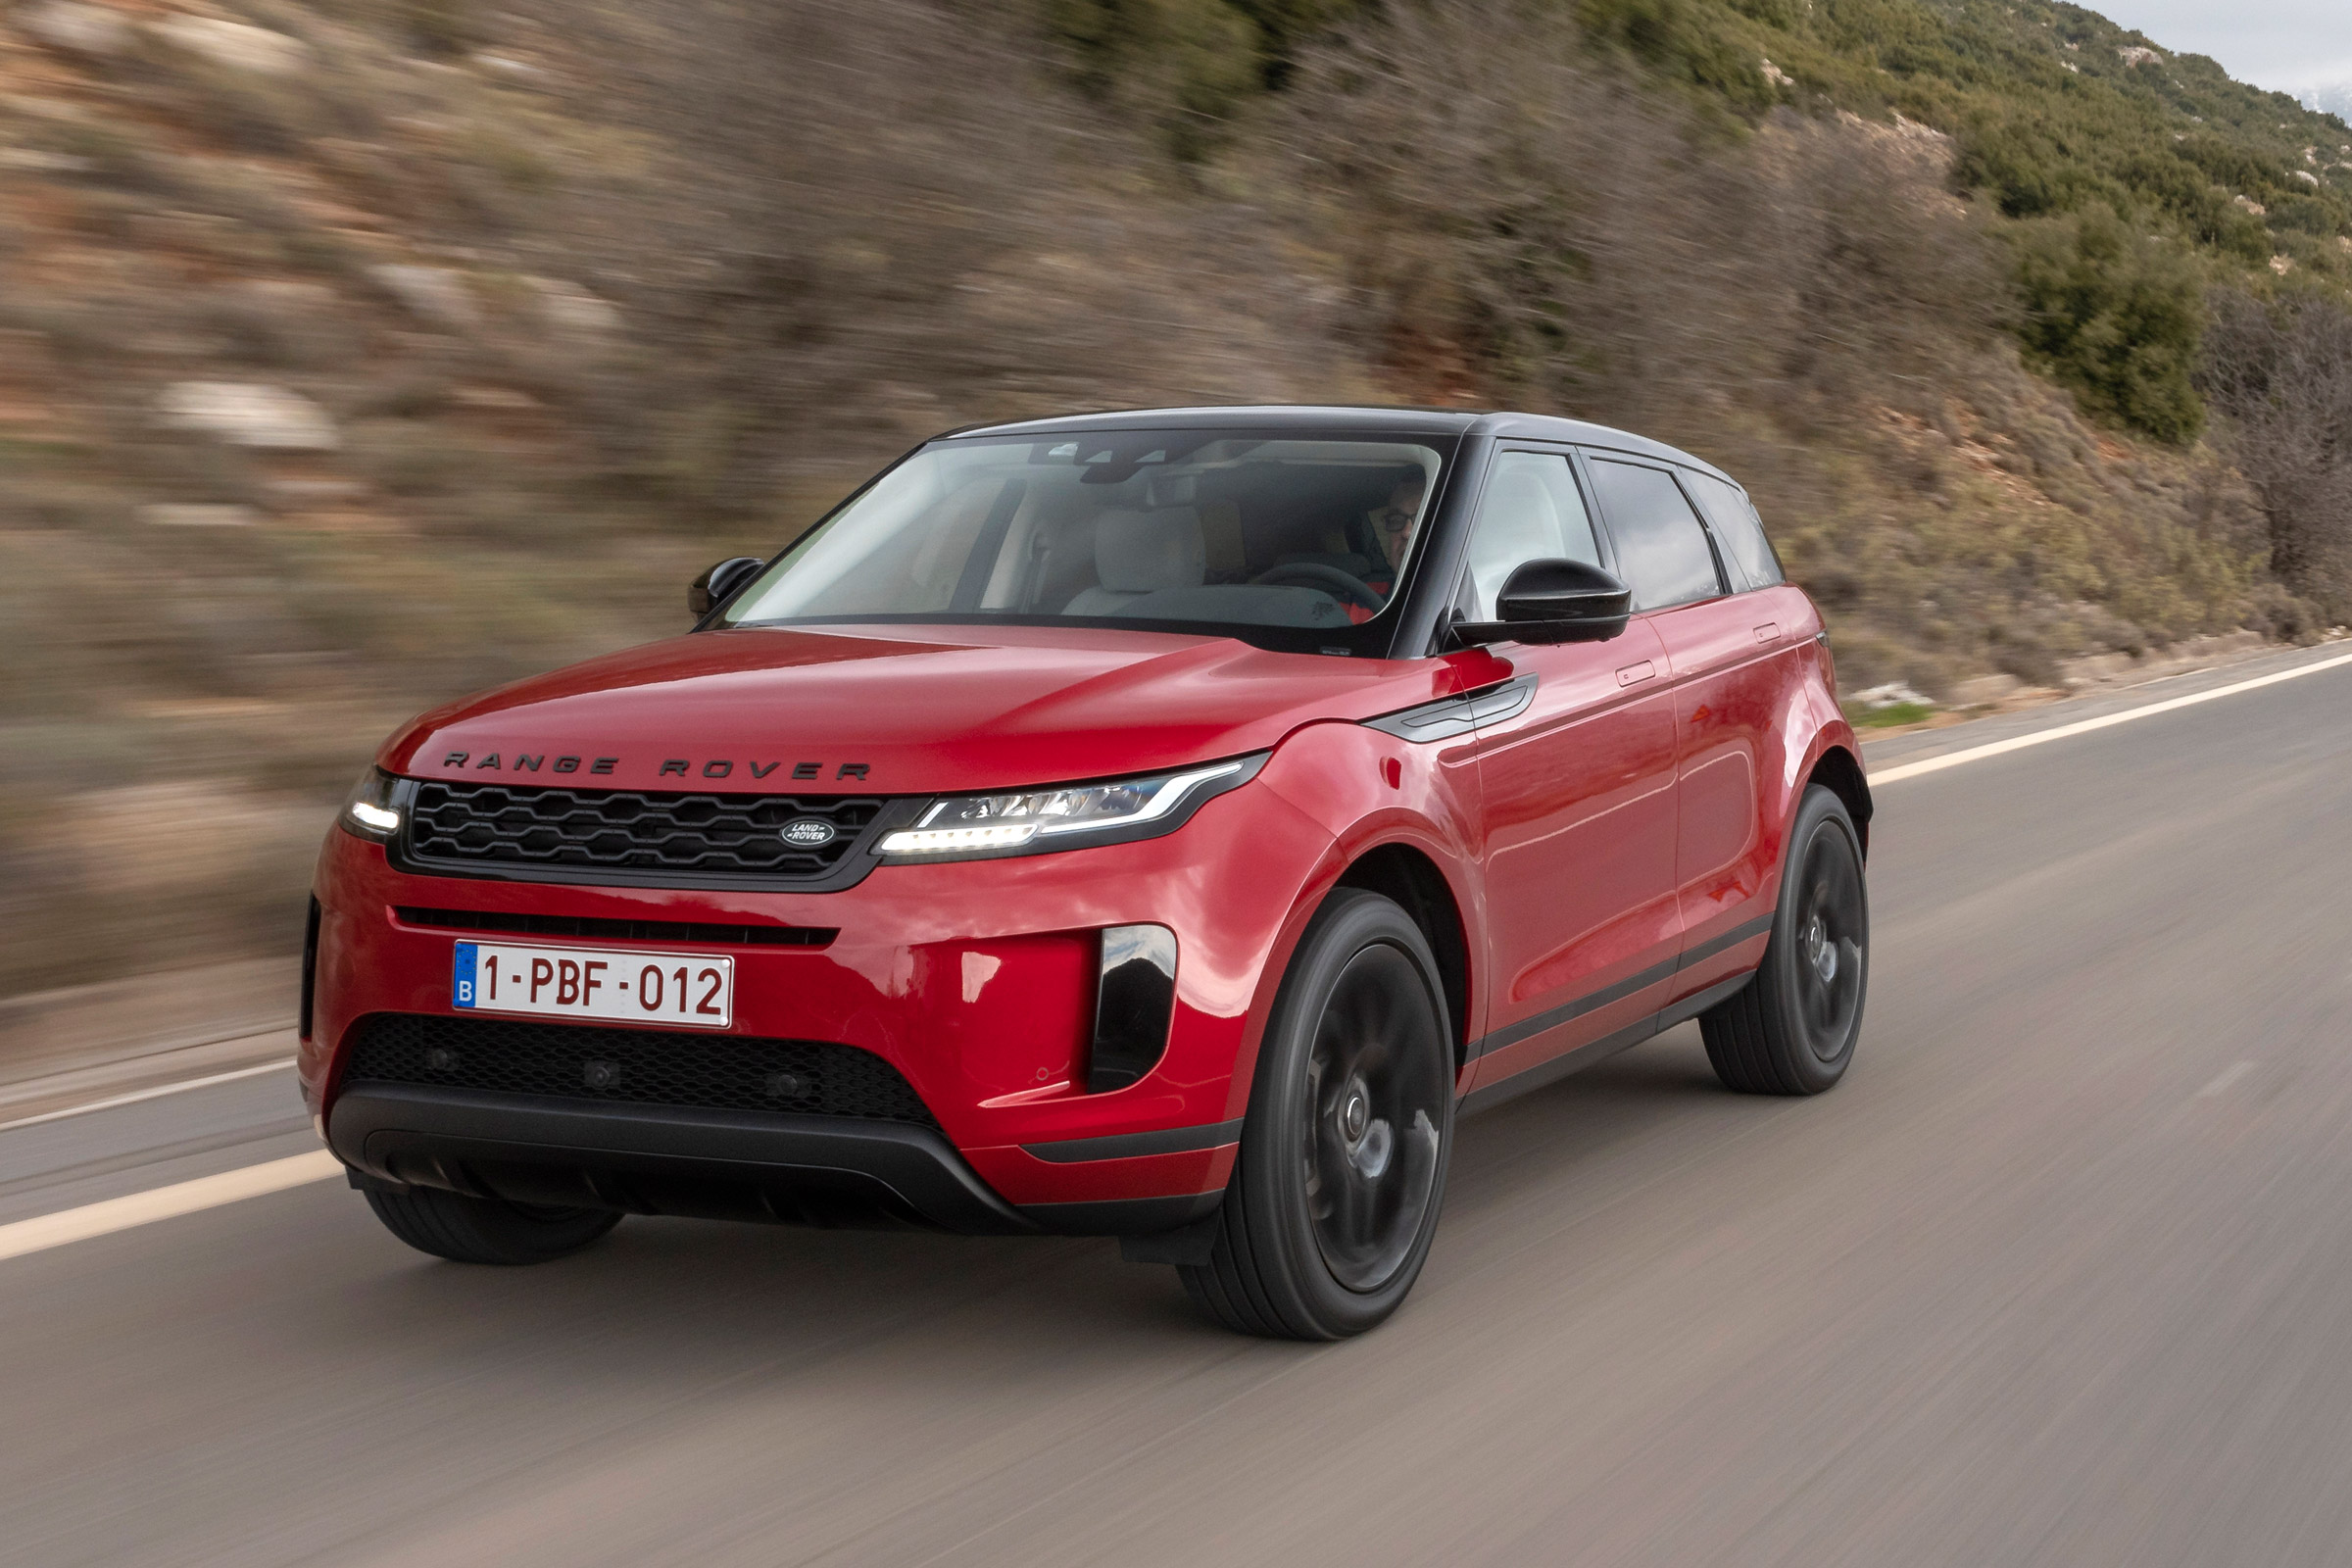 Range Rover Evoque Mpg Co2 Emissions Road Tax Insurance Groups Auto Express